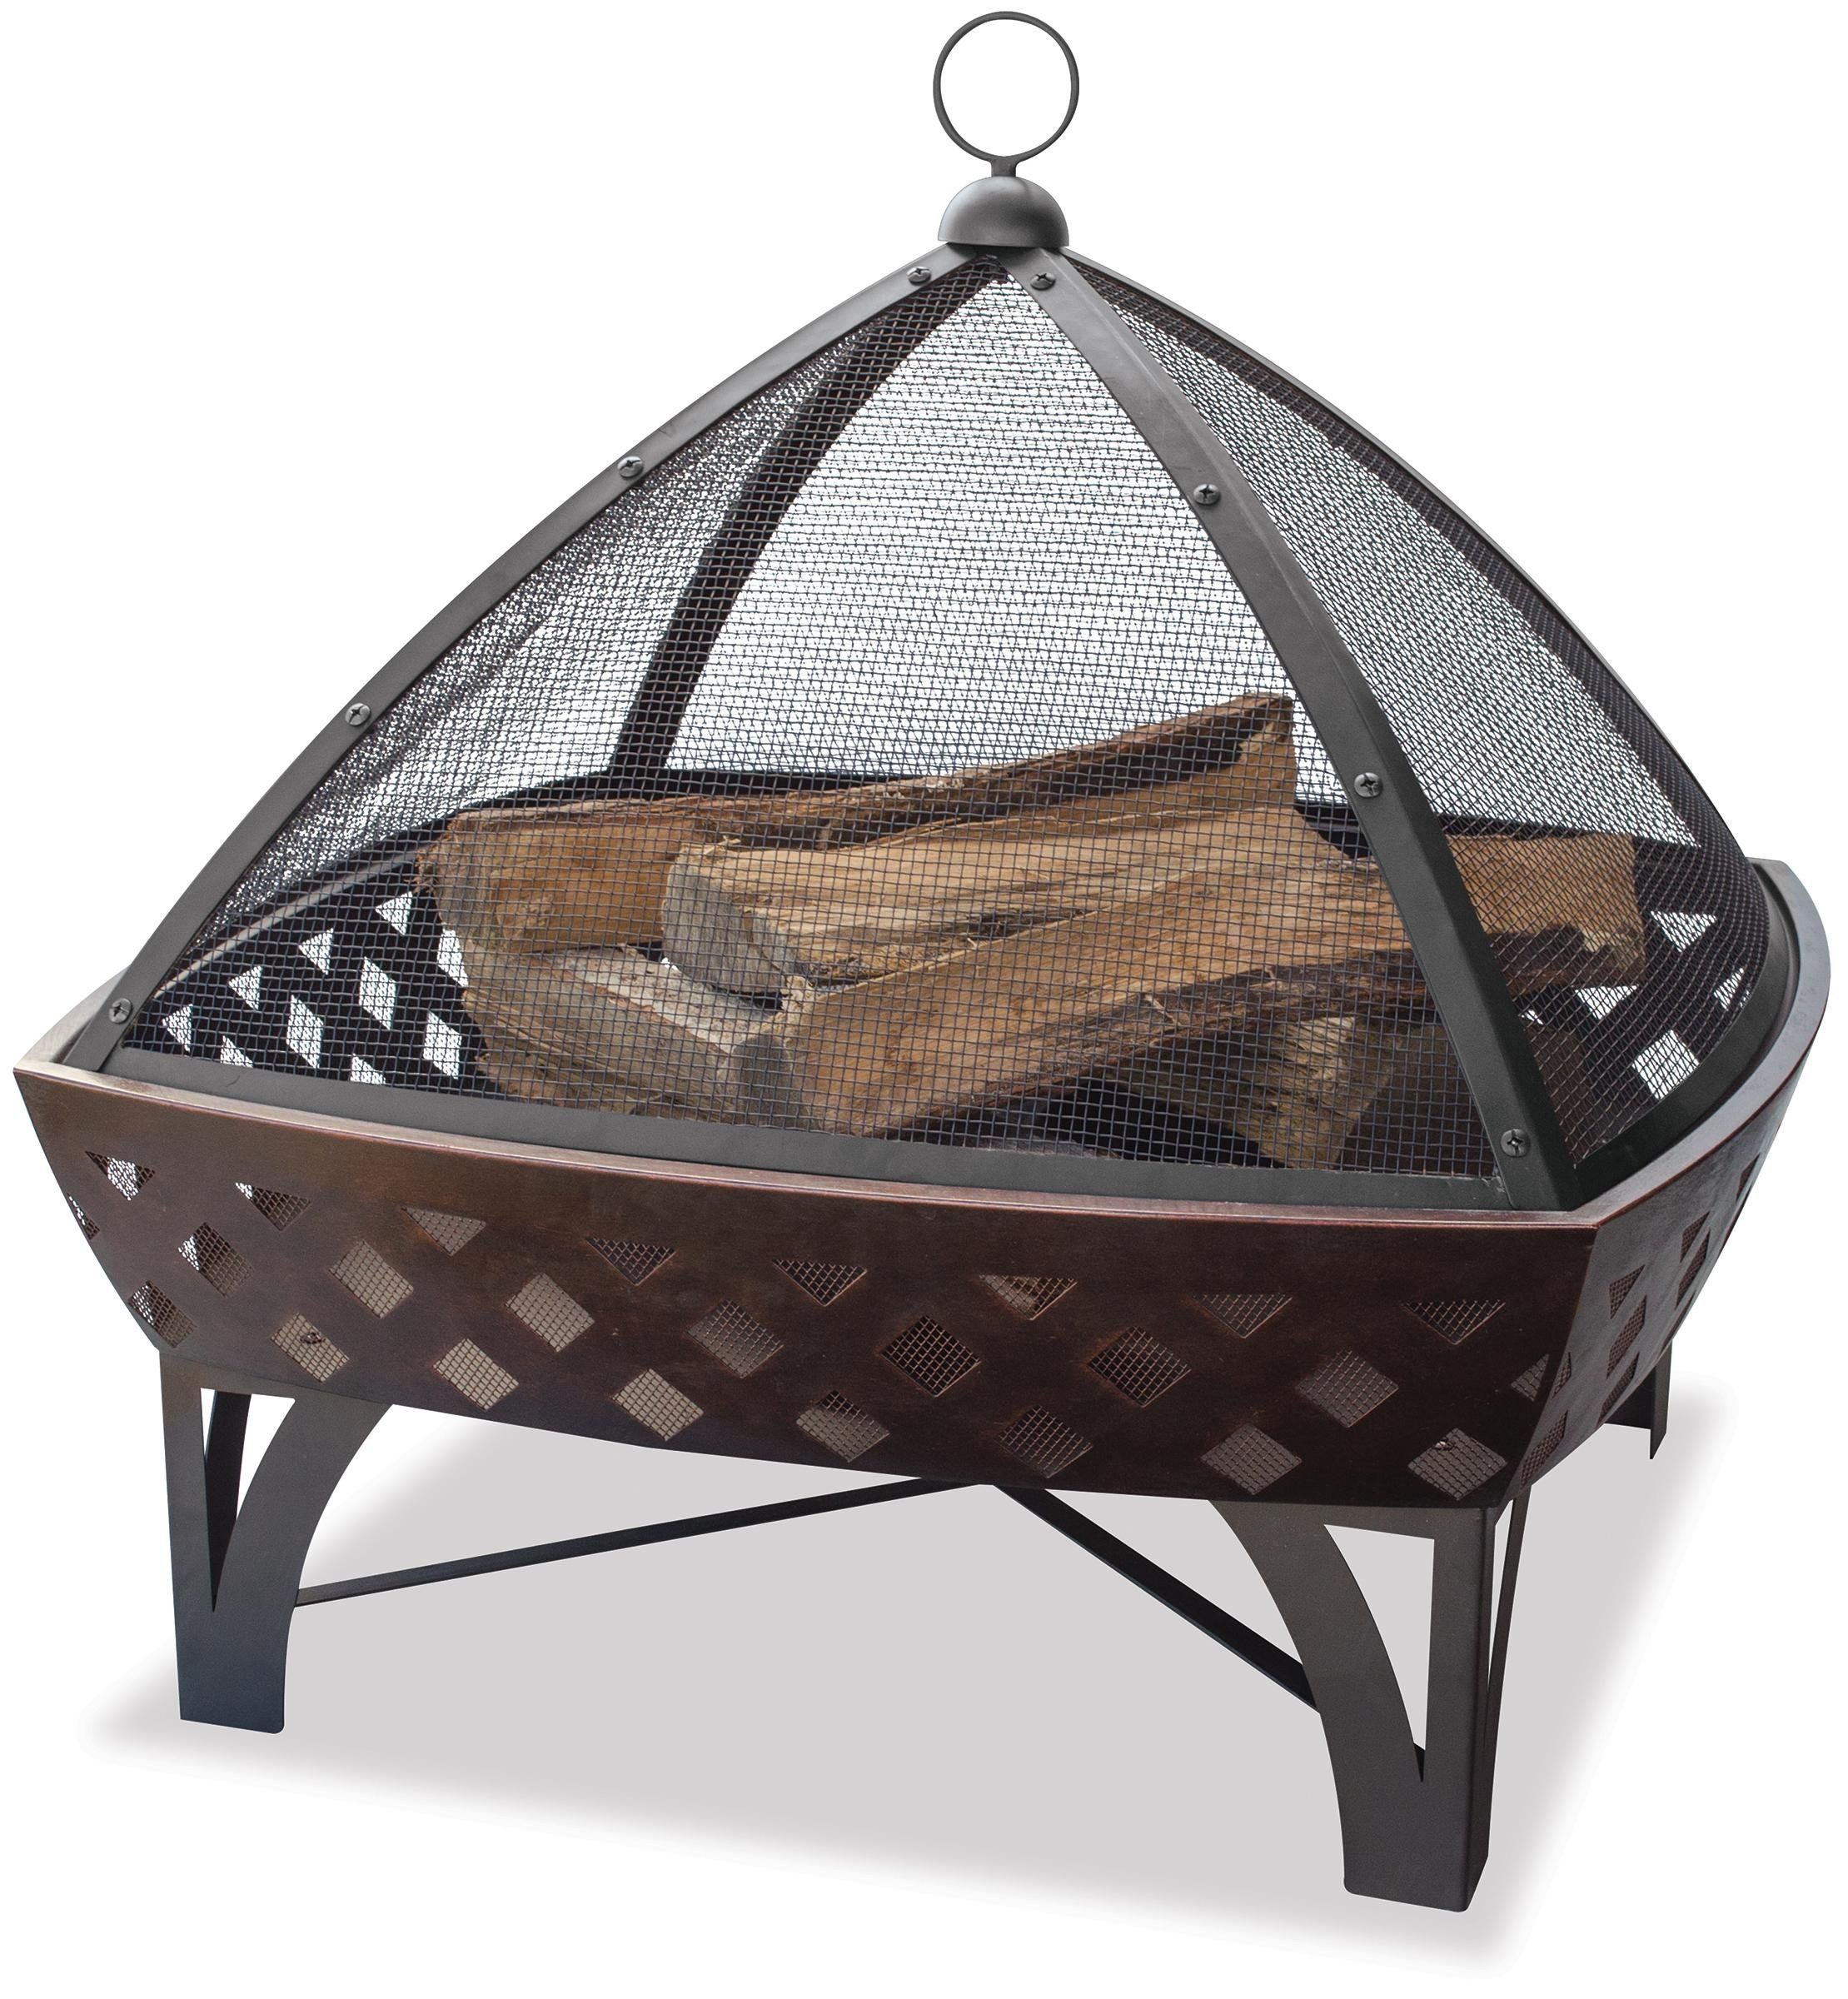 Endless Summer Outdoor Fireplace Lovely Endless Summer Wad1401sp Outdoor Fire Bowl with Lattice